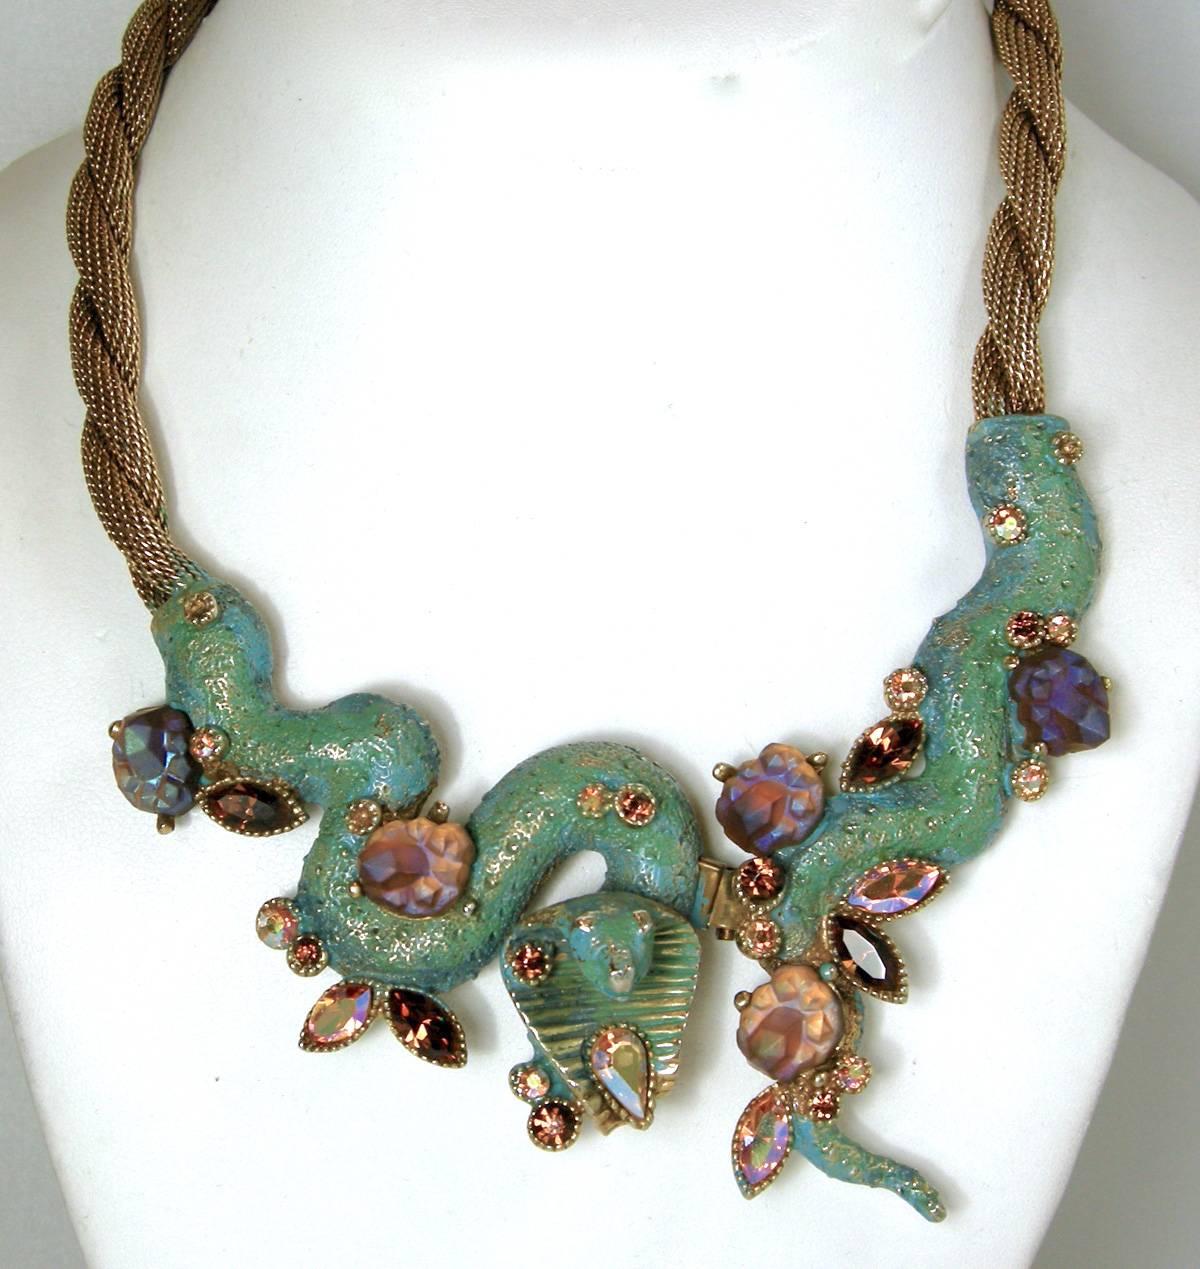 This is a rare and famous HAR vintage cobra necklace. It has a twisted gold tone chain leading down to the cobra centerpiece. The cobra has HAR’s famous Aurora Borealis stones on green shimmering enameling.  It has a prong set lava stones. The